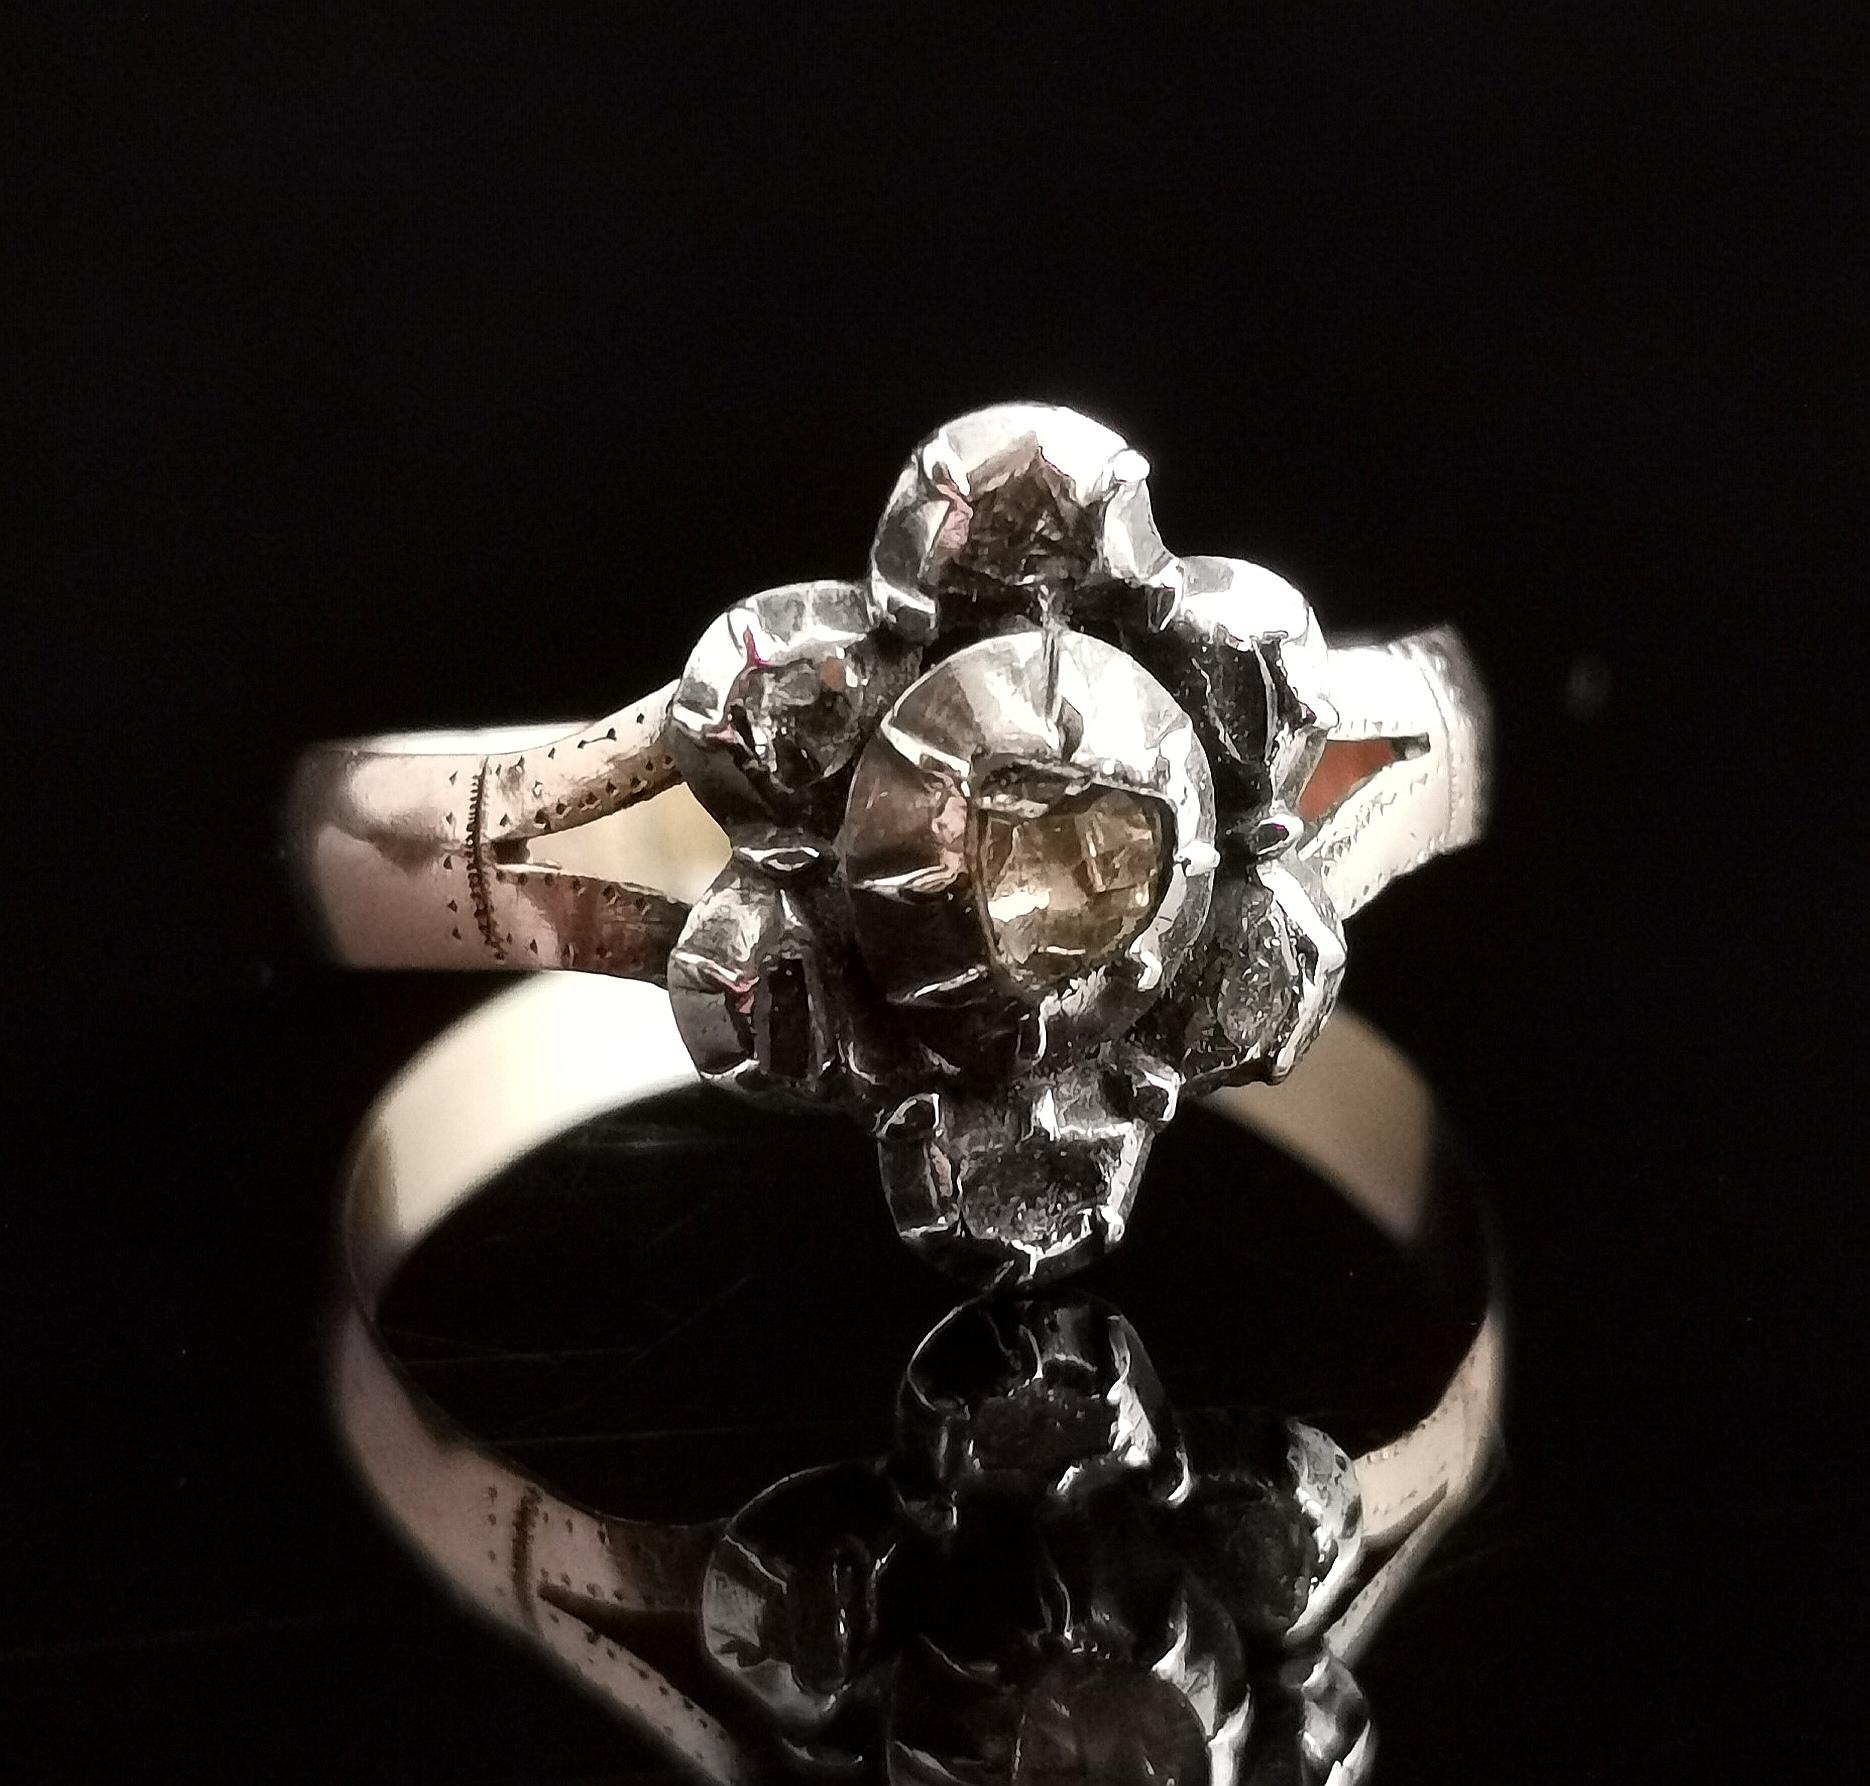 A charming antique Georgian rose cut diamond navette shaped ring.

This ring has obviously had quite a life and it is showing some scars and wear but if you can look past its flaws you have a ring full of old charm and character.

A navette shaped